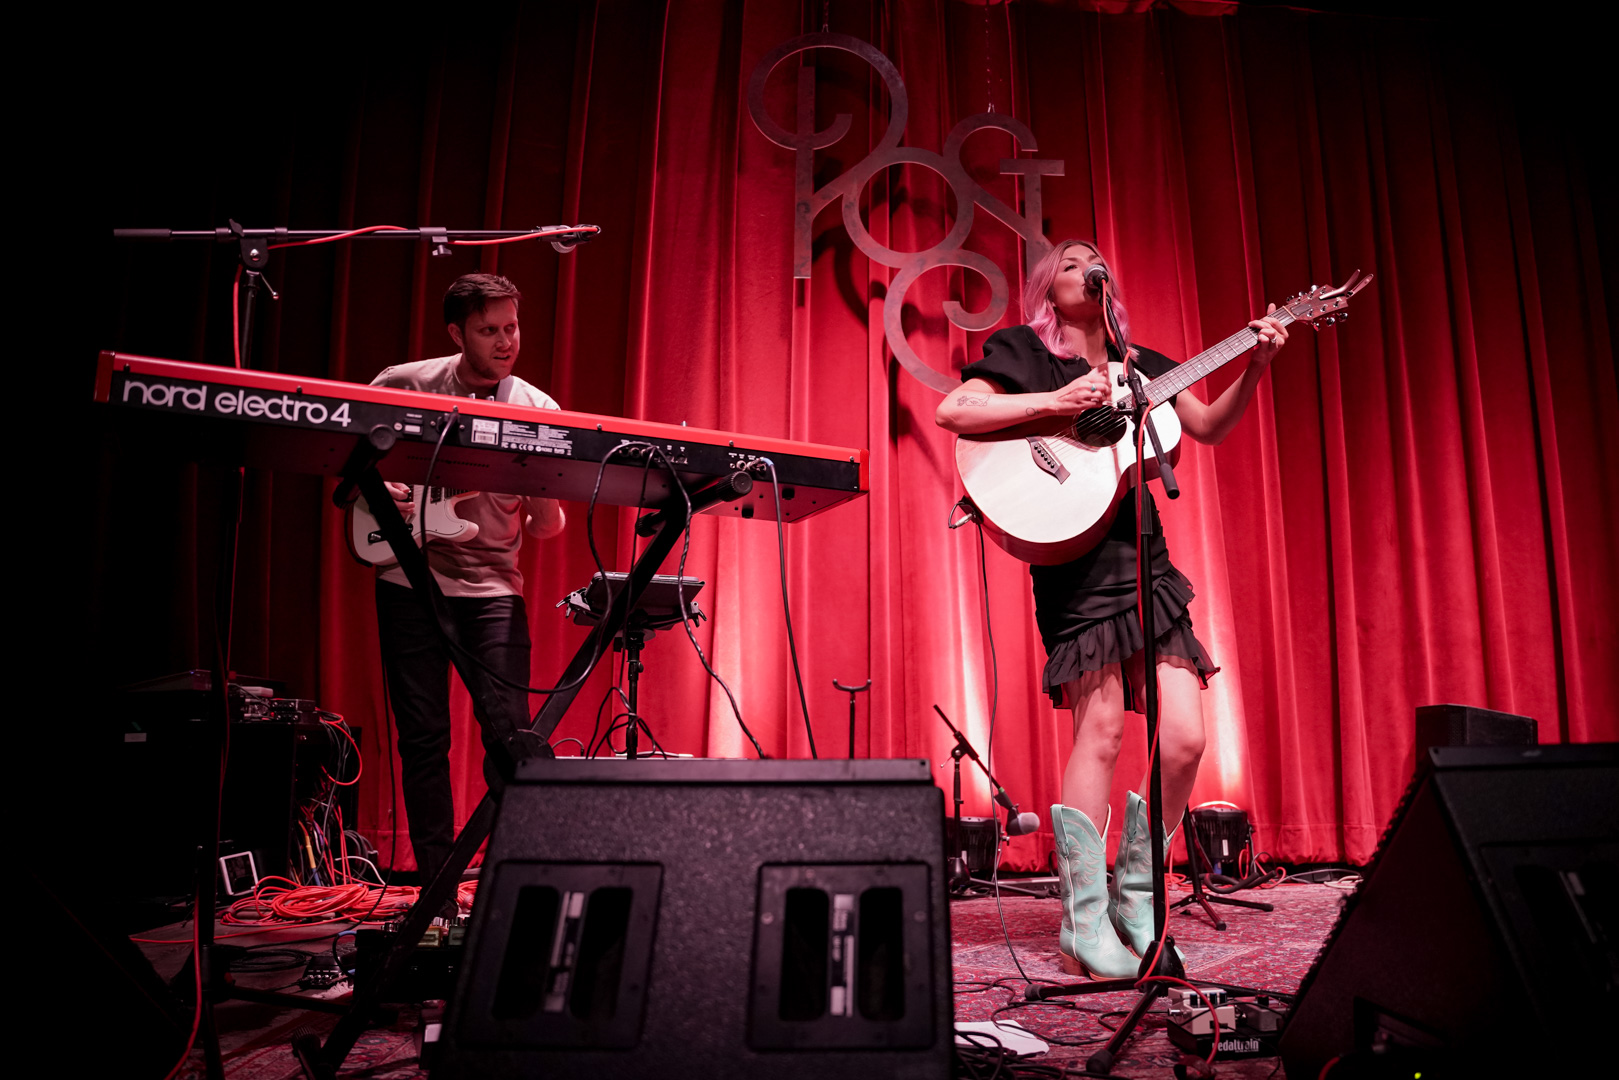 A man and woman play music on stage